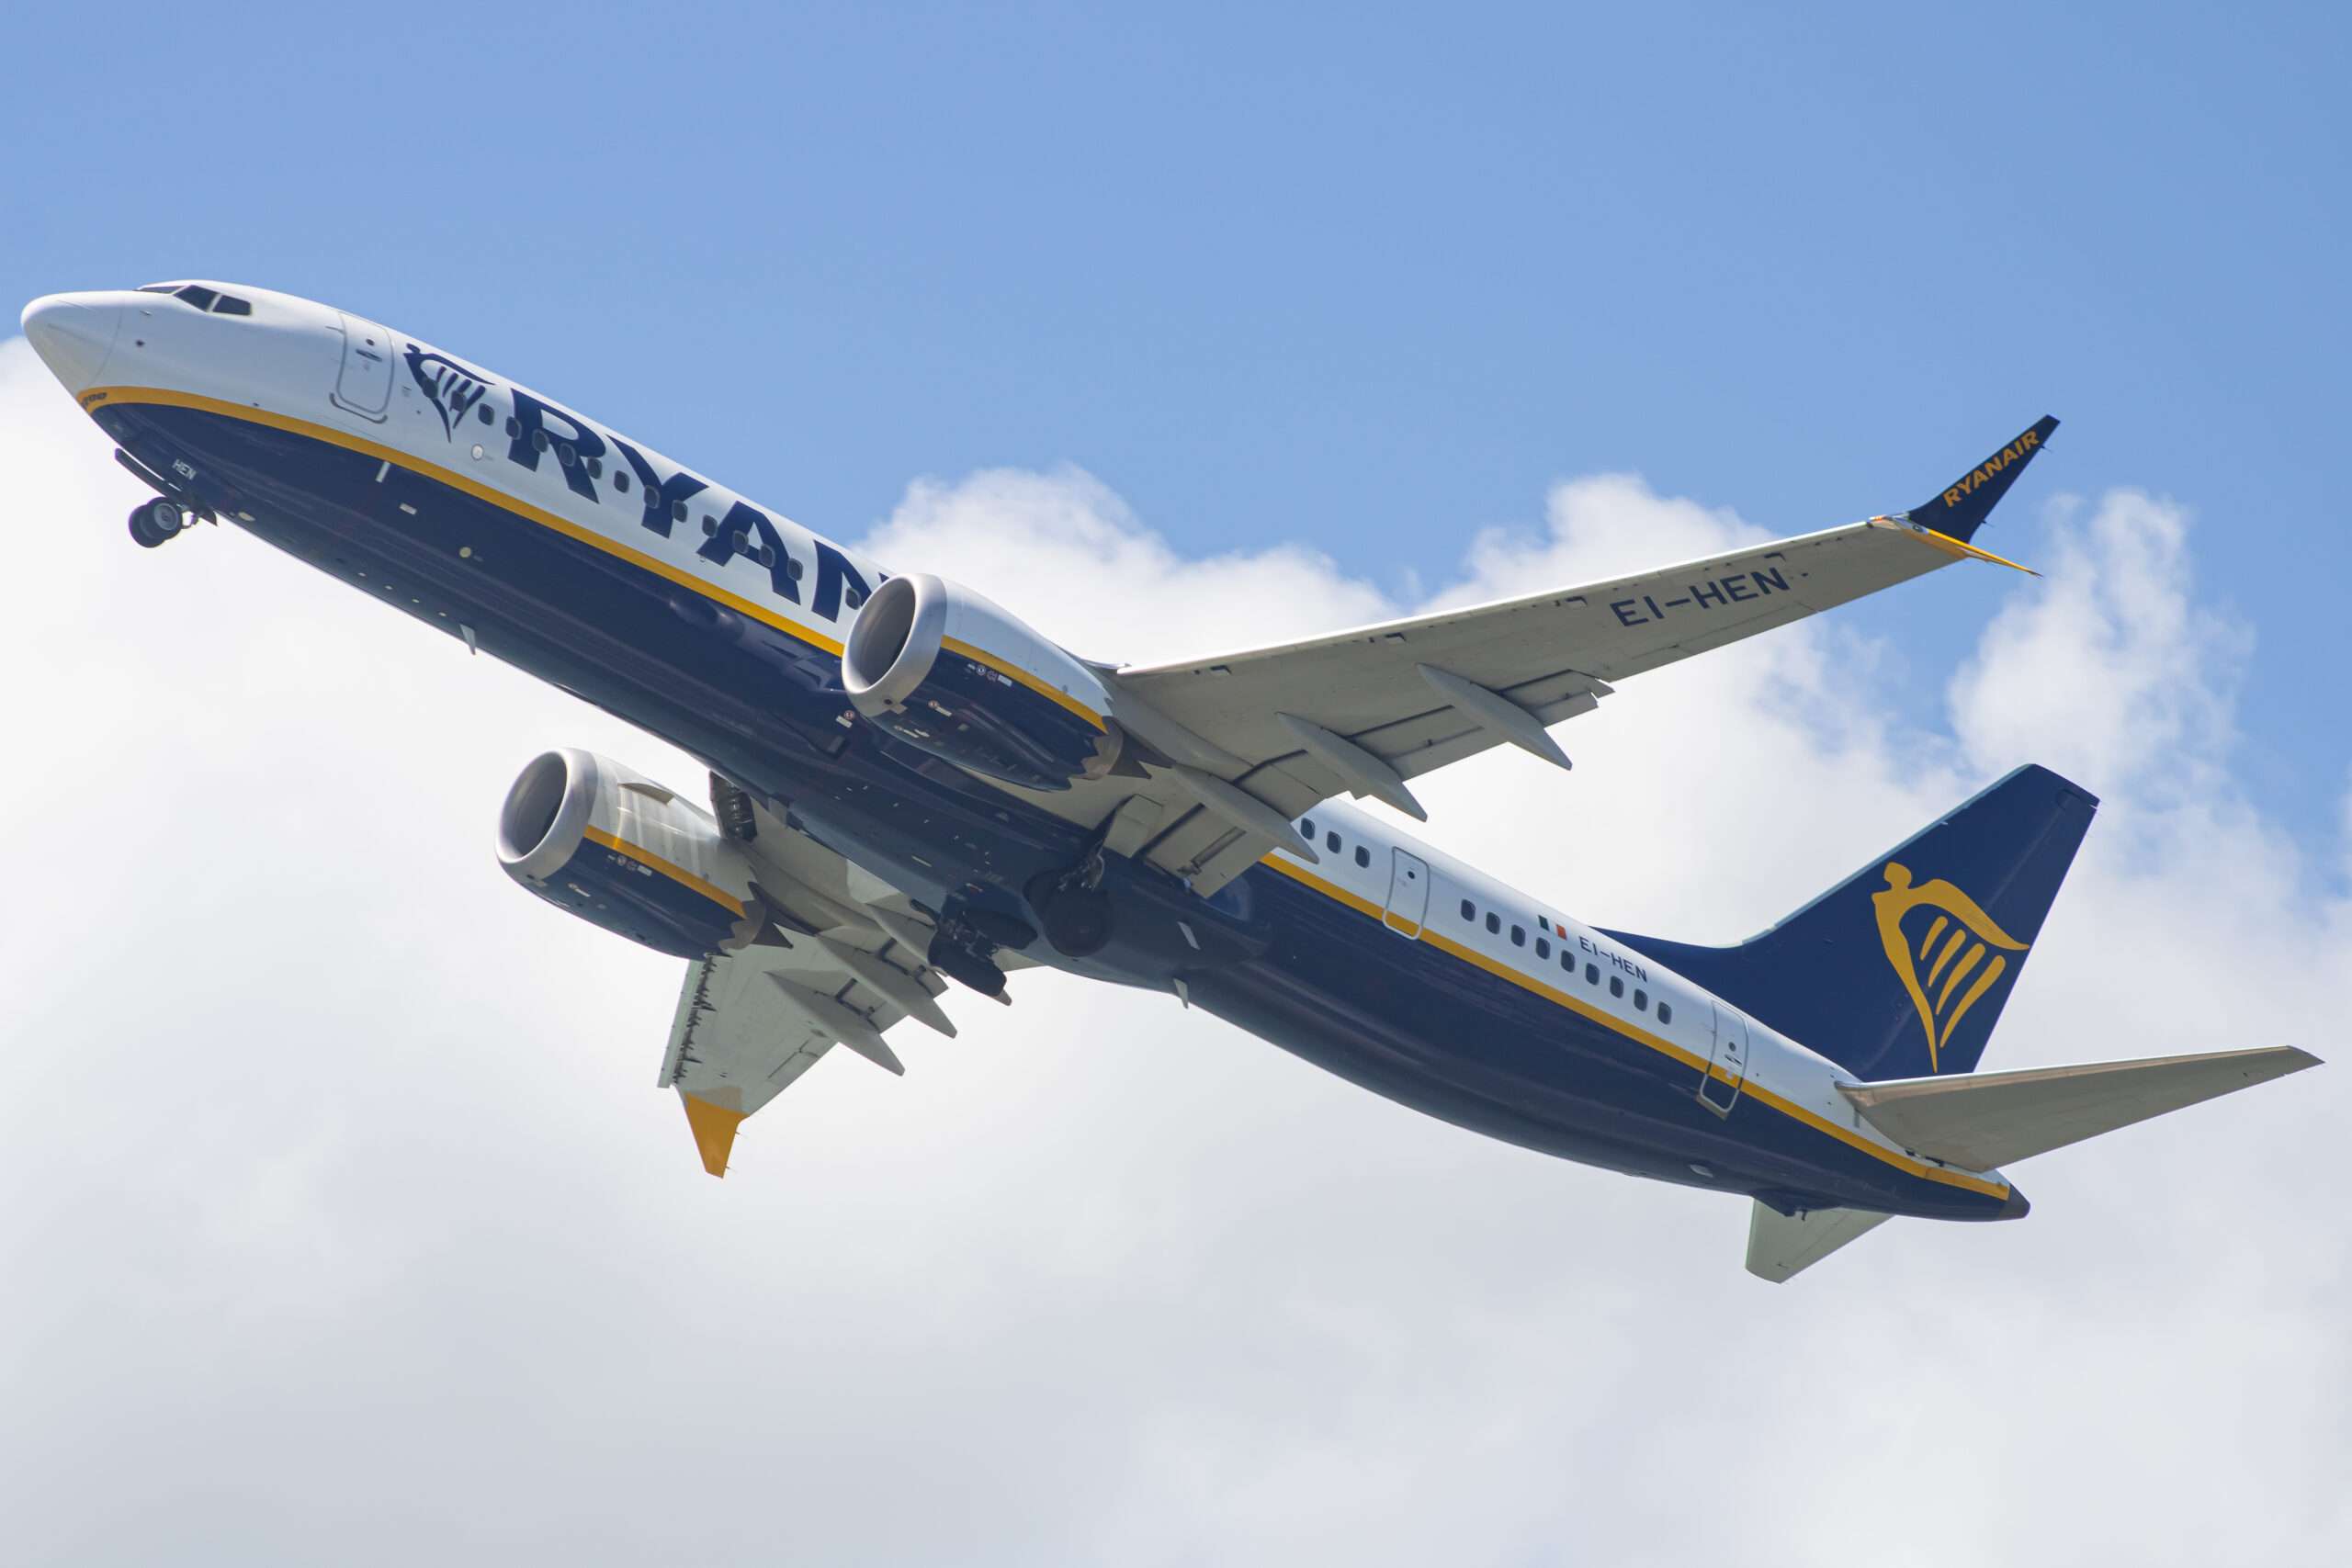 Ryanair Maintains Kerry Winter Services, Grows Knock